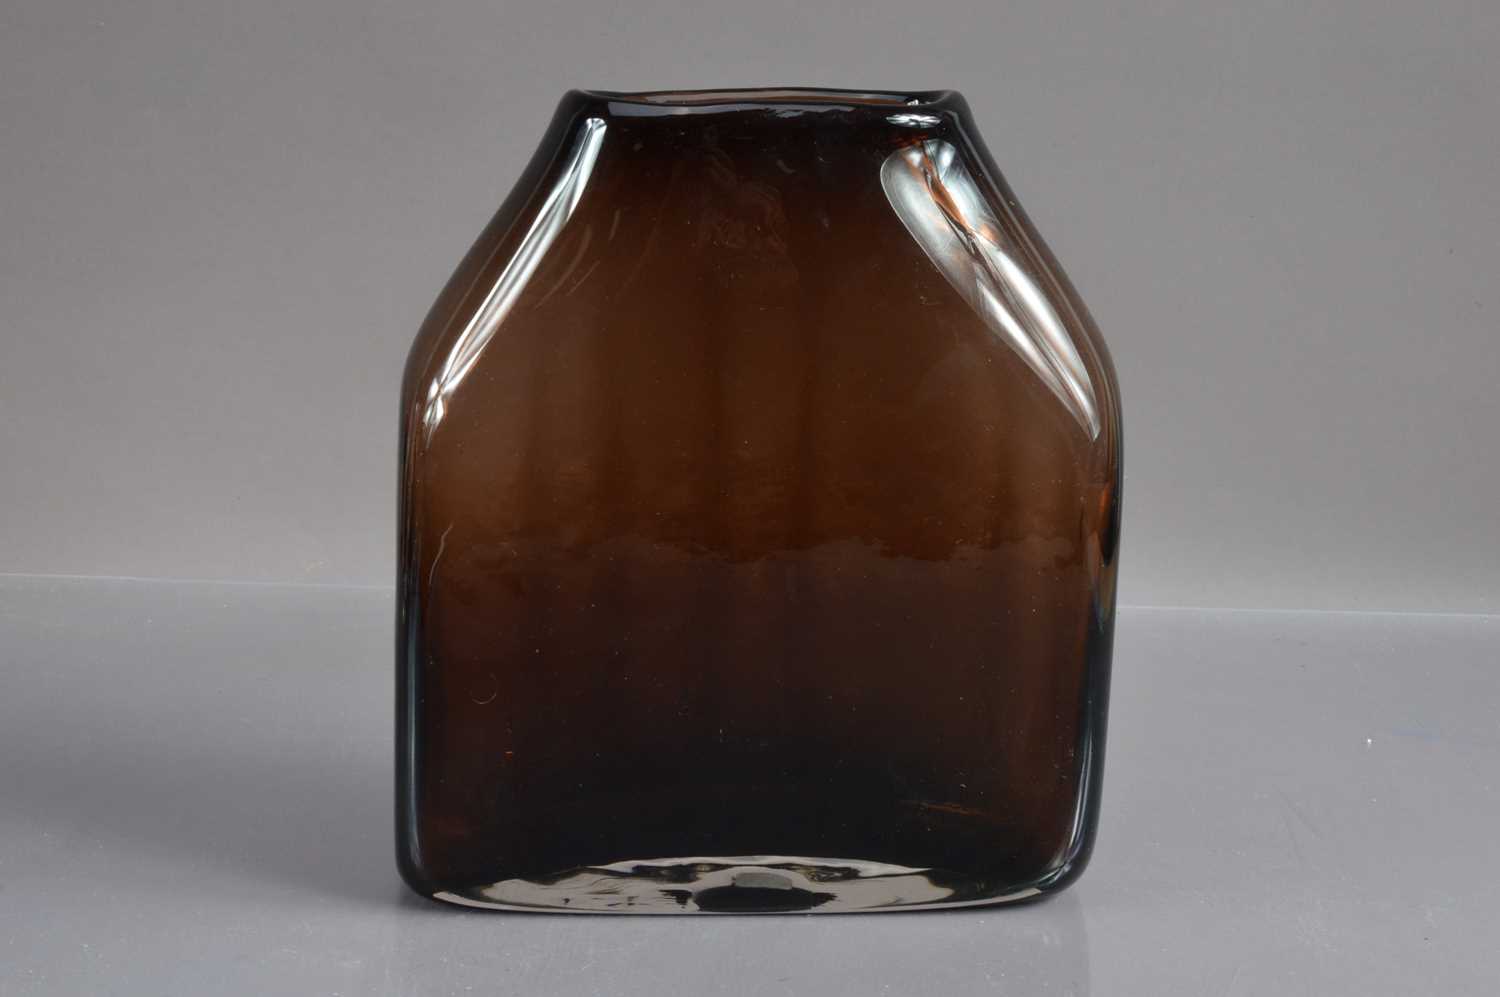 A Whitefriars shoulder vase in 'Cinnamon' colourway designed by Geoffrey Baxter (1922-1995), - Image 3 of 6